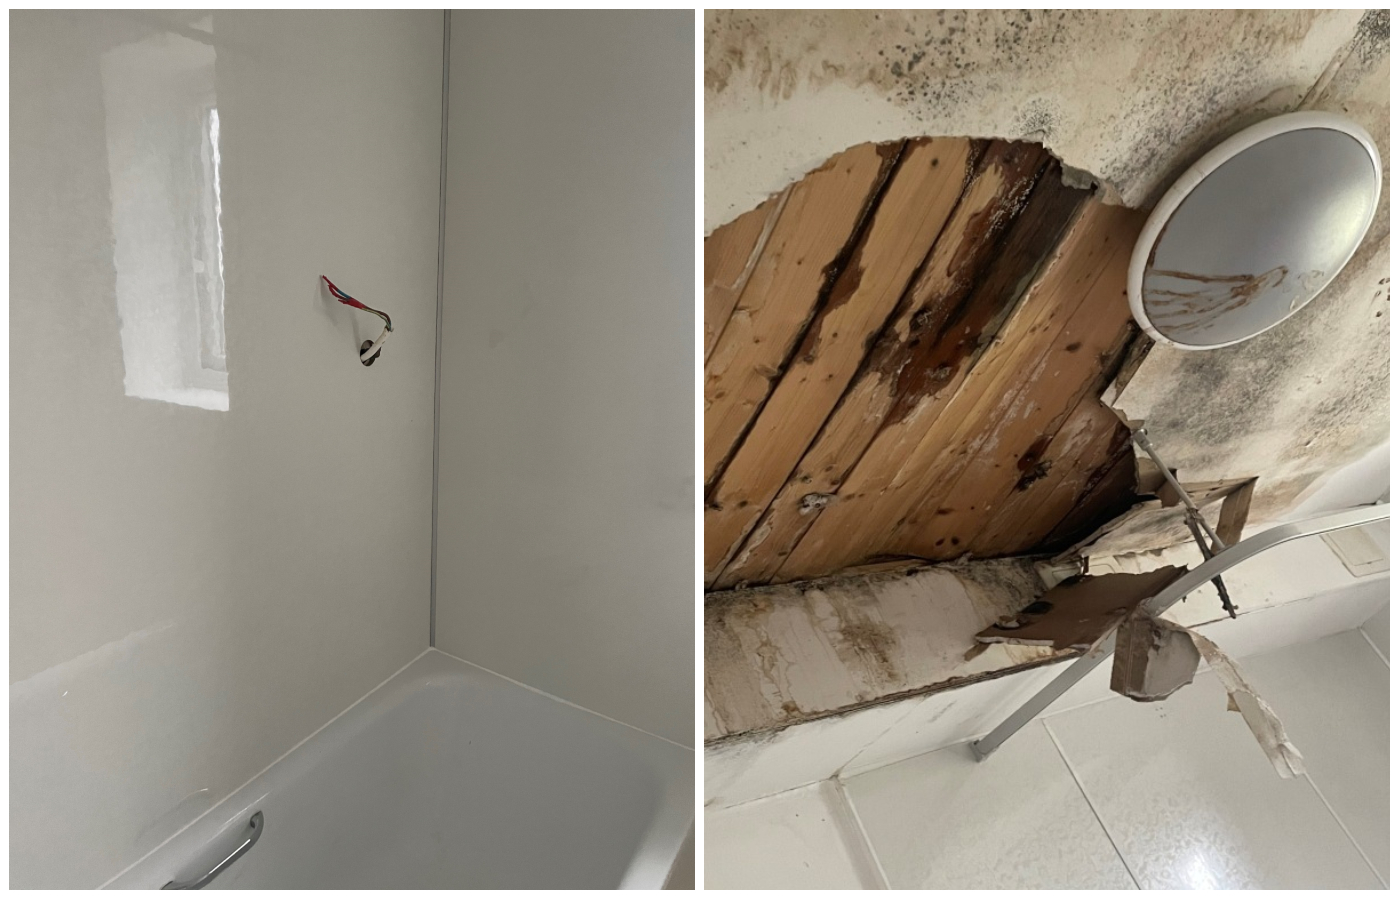 The family moved out after their bathroom ceiling collapsed - but returned to no facilities installed in the room. 